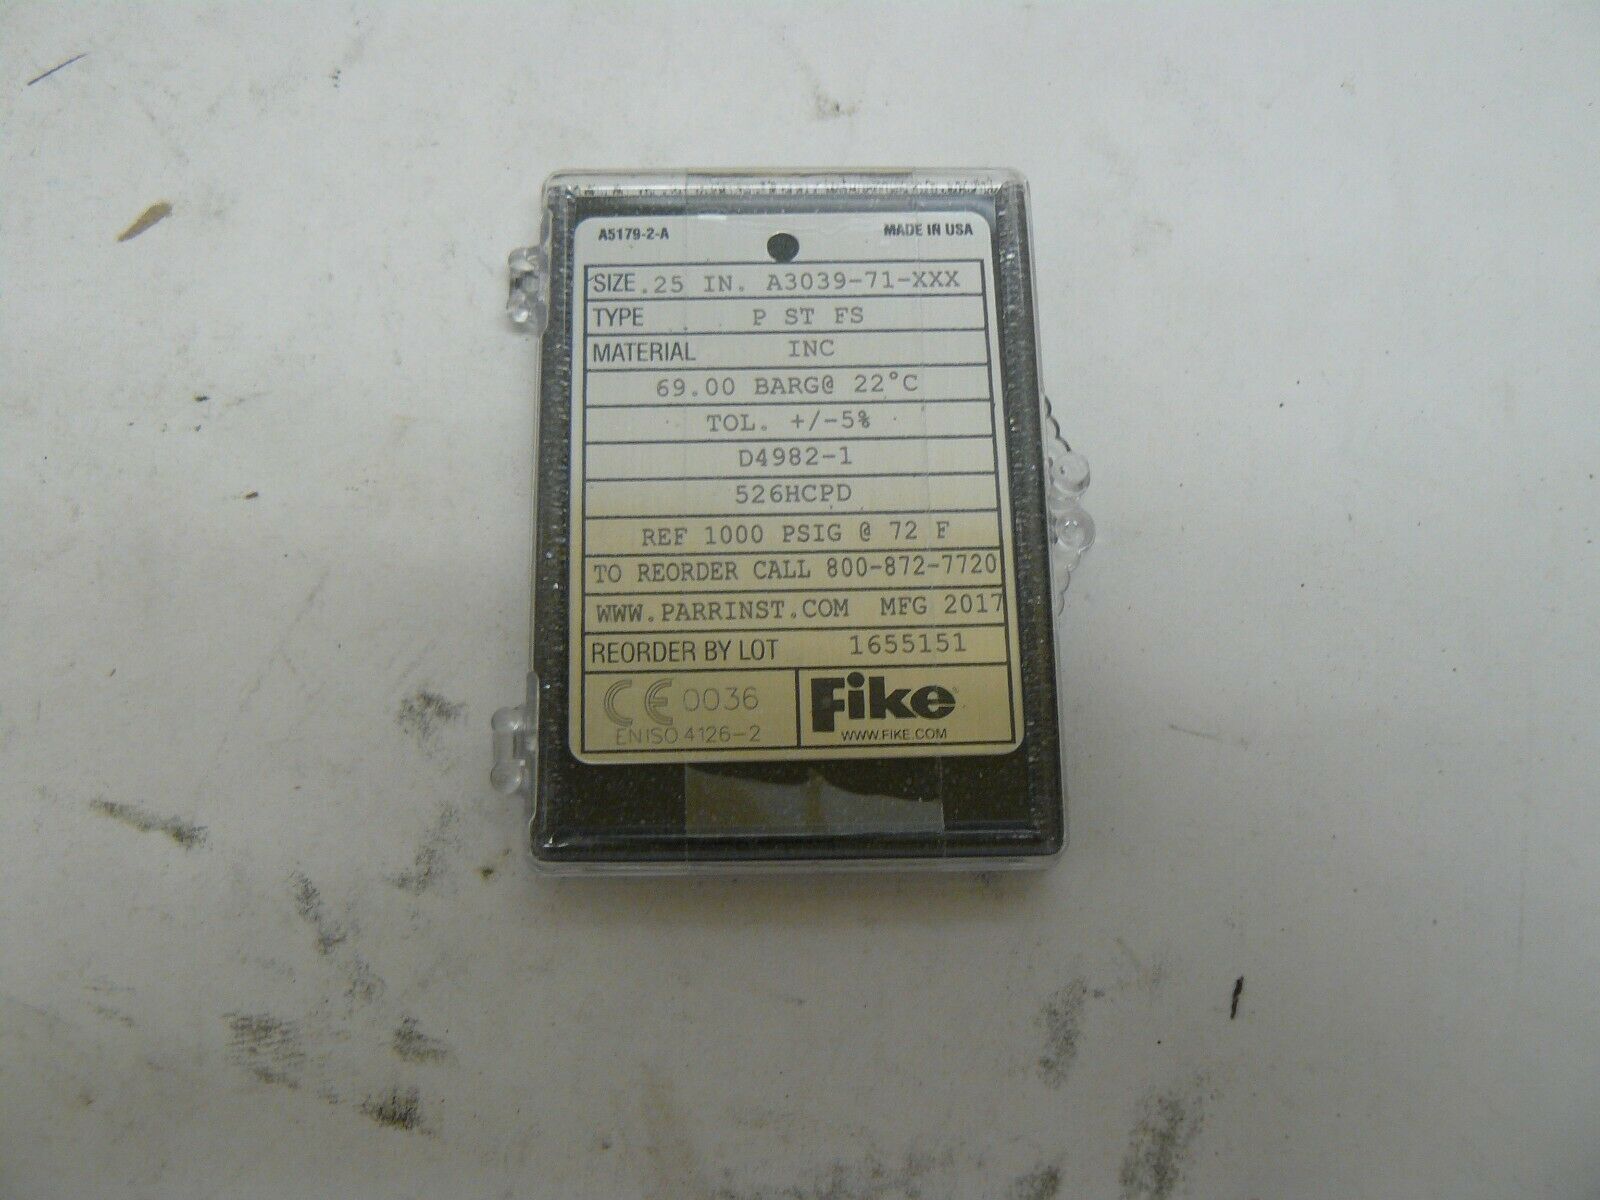 Fike A3039-71-xxx Parr 526hcpd Inconel Rupture Disk 1000 Psi New